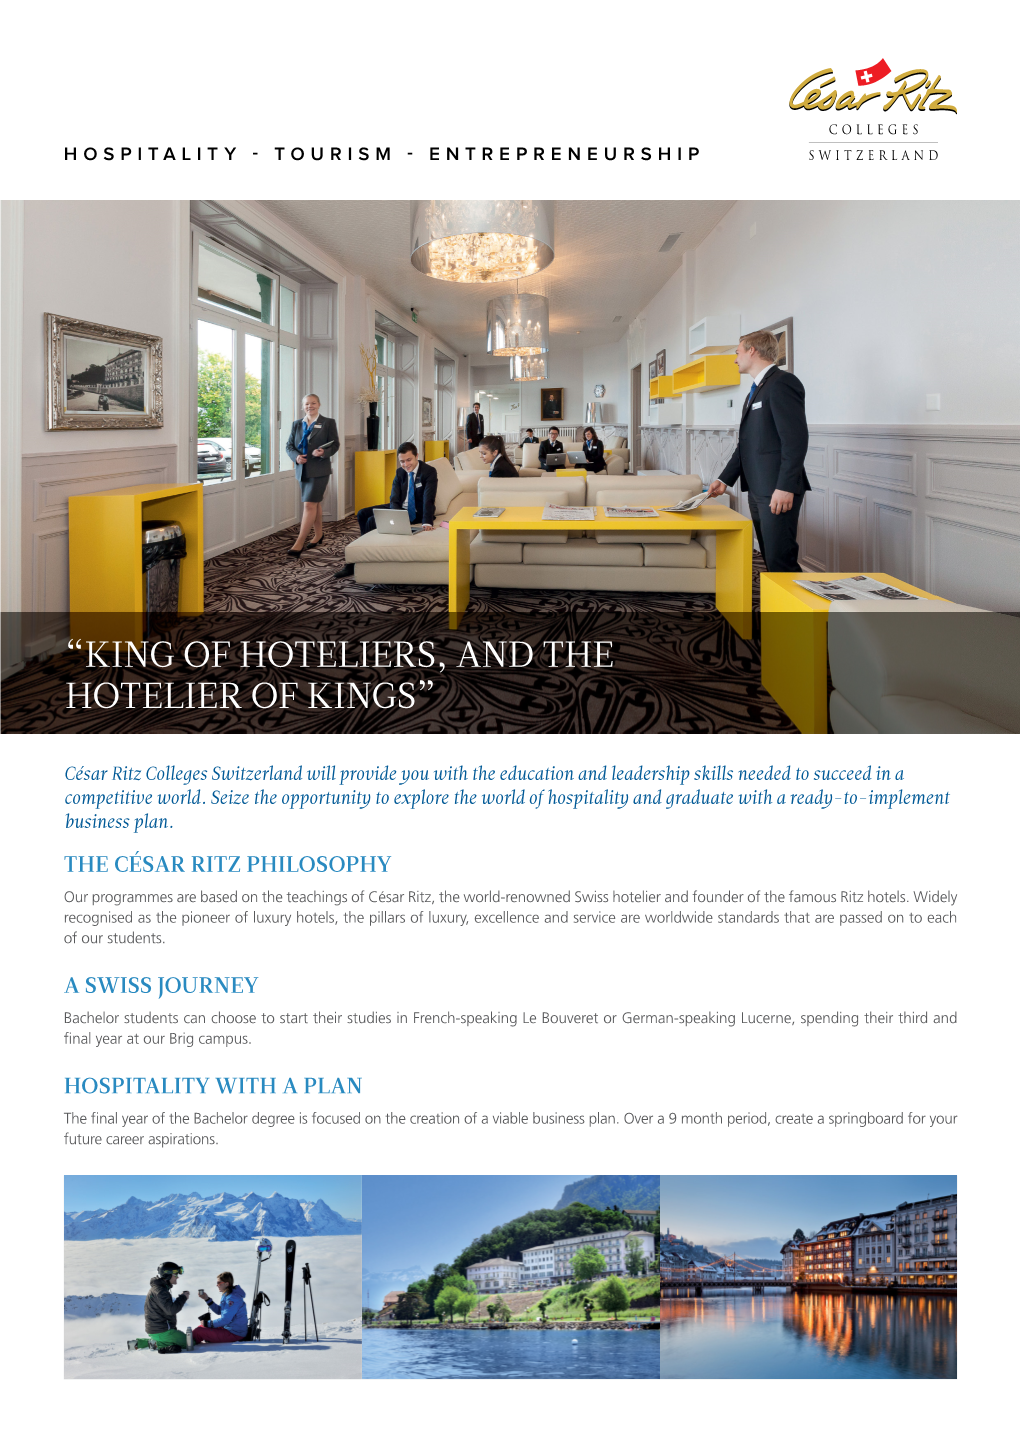 “King of Hoteliers, and the Hotelier of Kings”